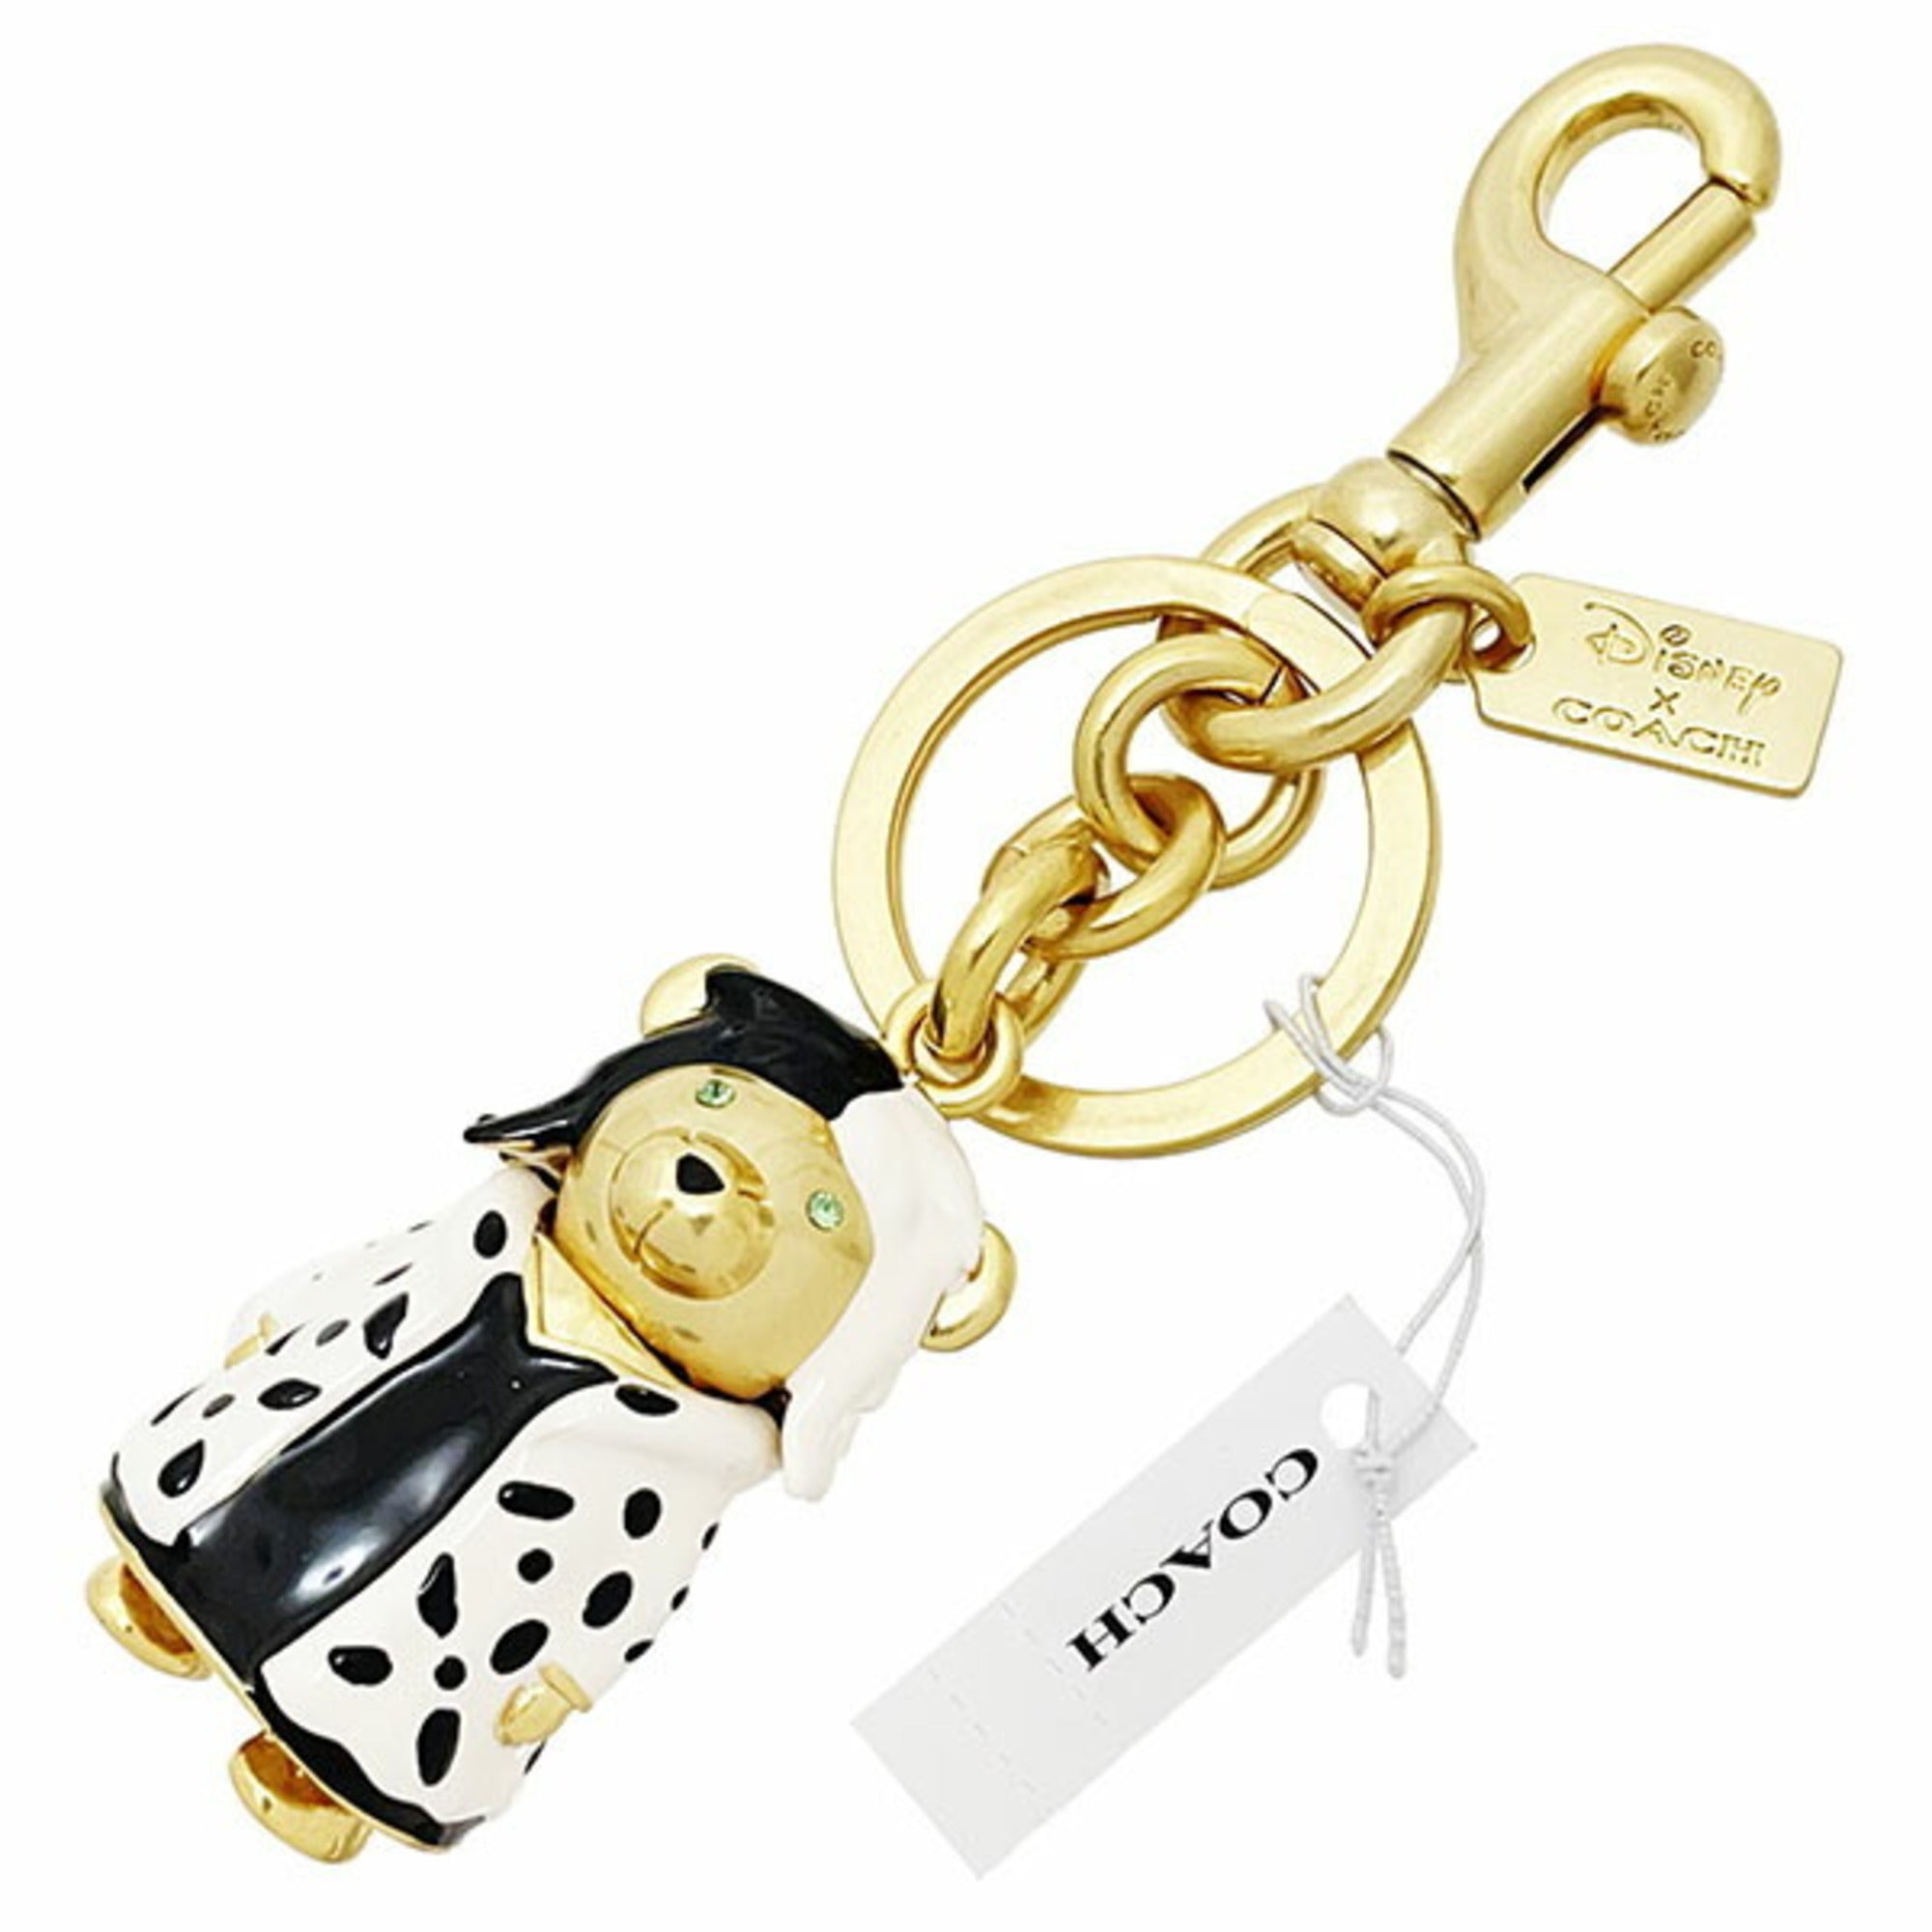 Coach Outlet Keychains & Bag Charms (CC343)